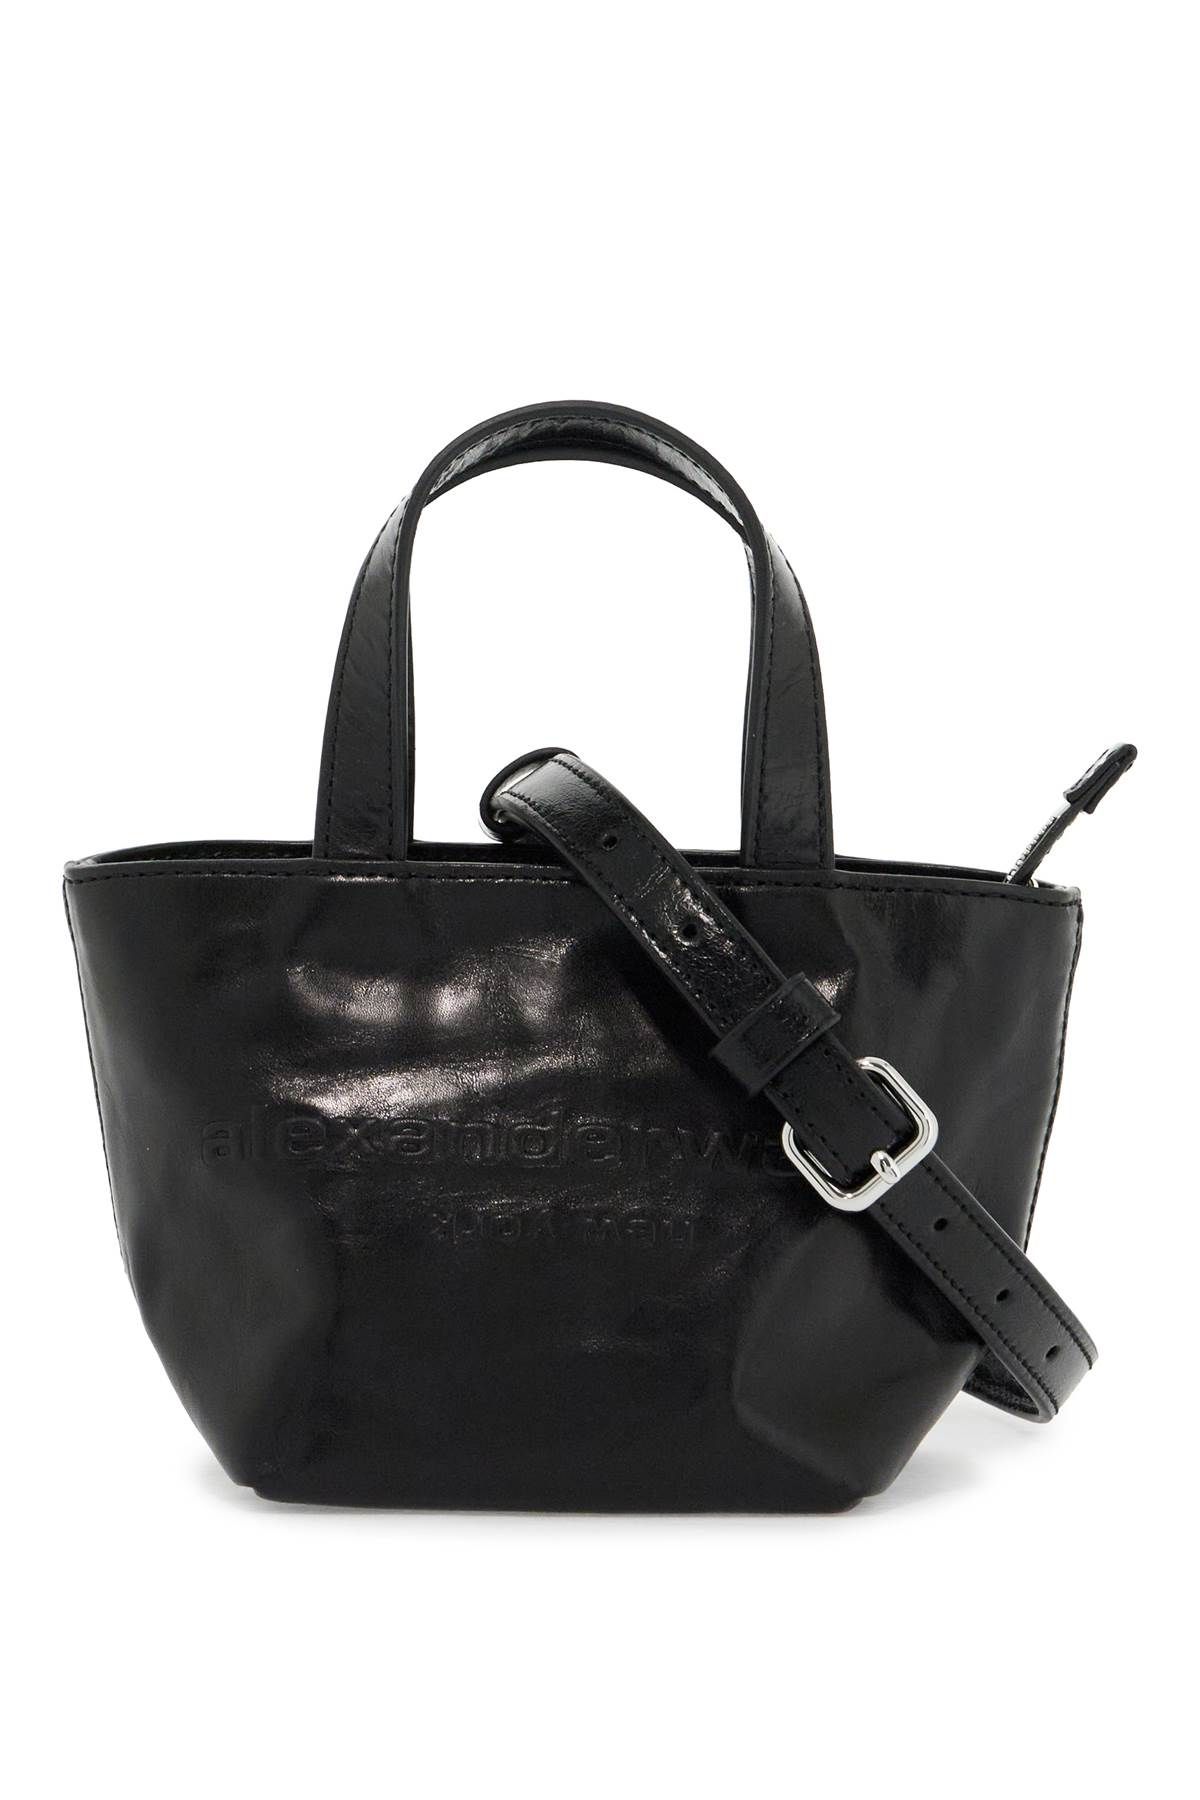 Alexander Wang ALEXANDER WANG mini leather tote bag with punch detailing